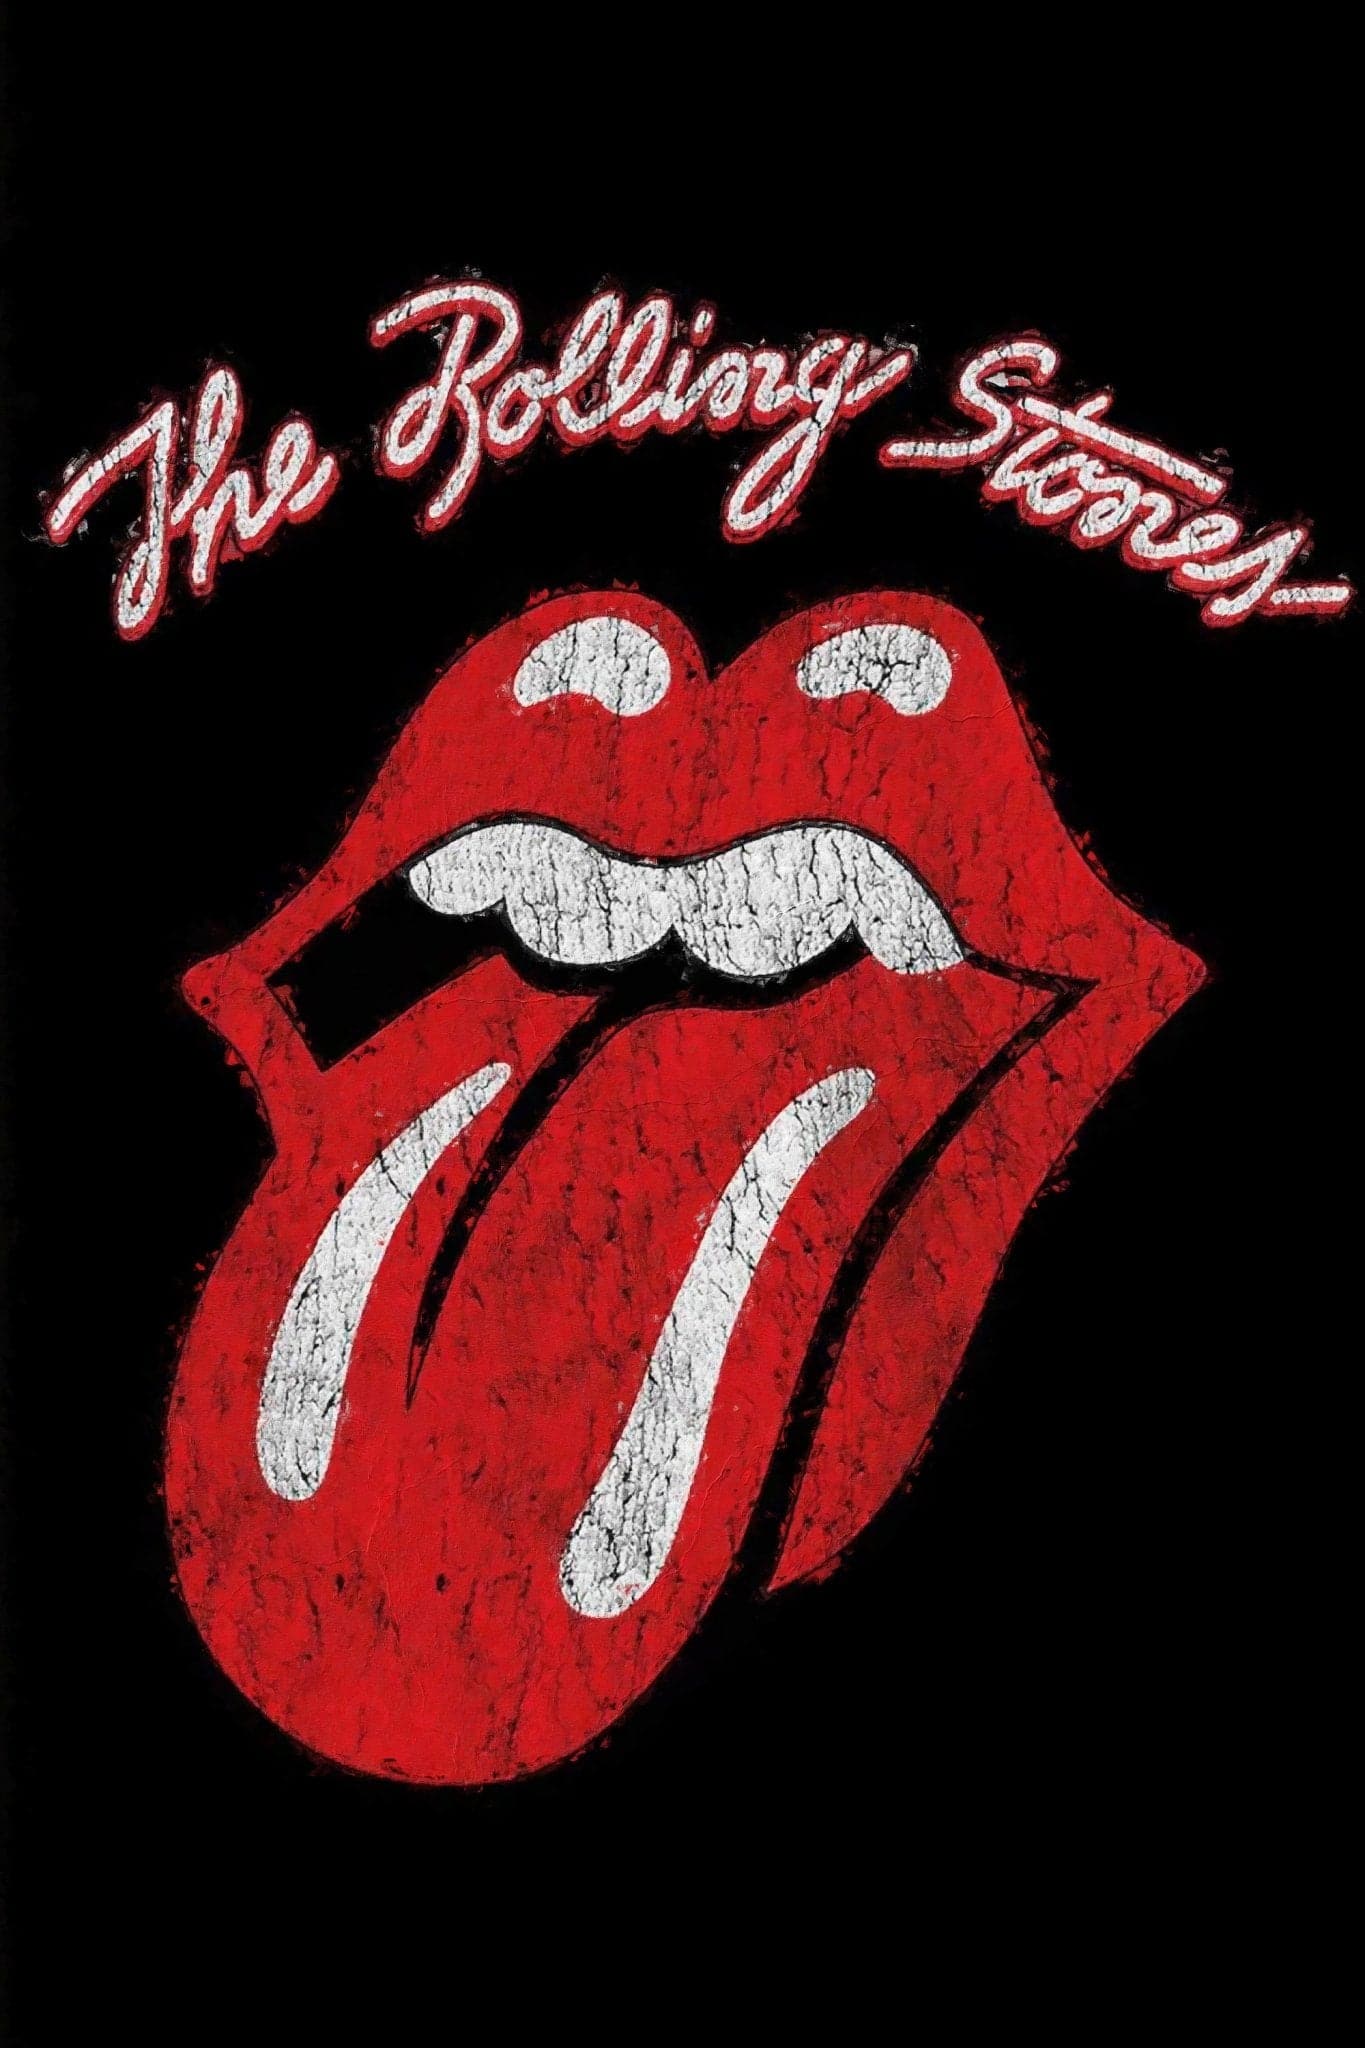 The Rolling Stones 